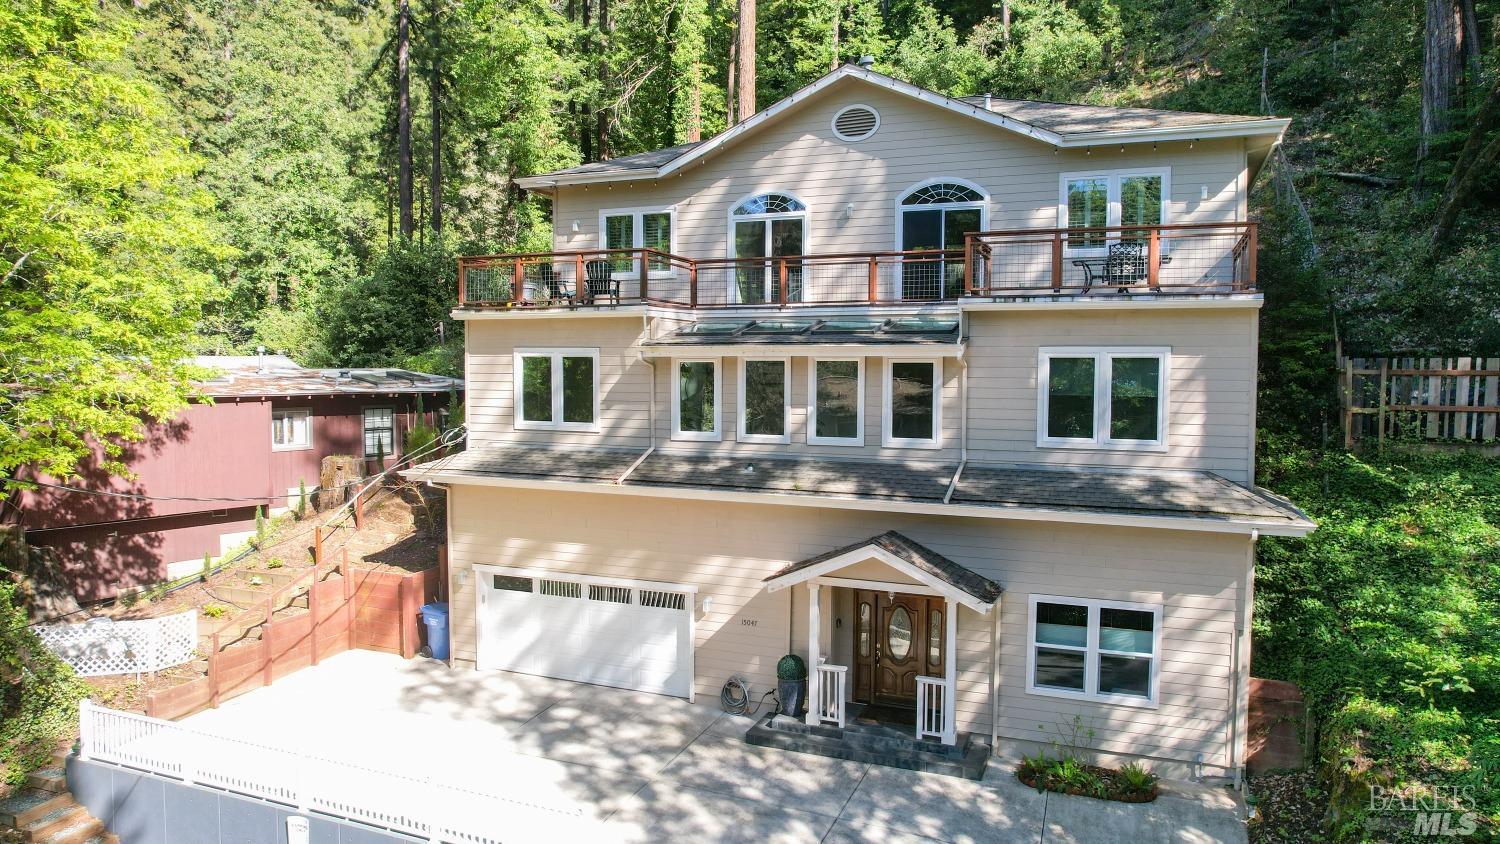 Photo of 15047 Drake Rd in Guerneville, CA